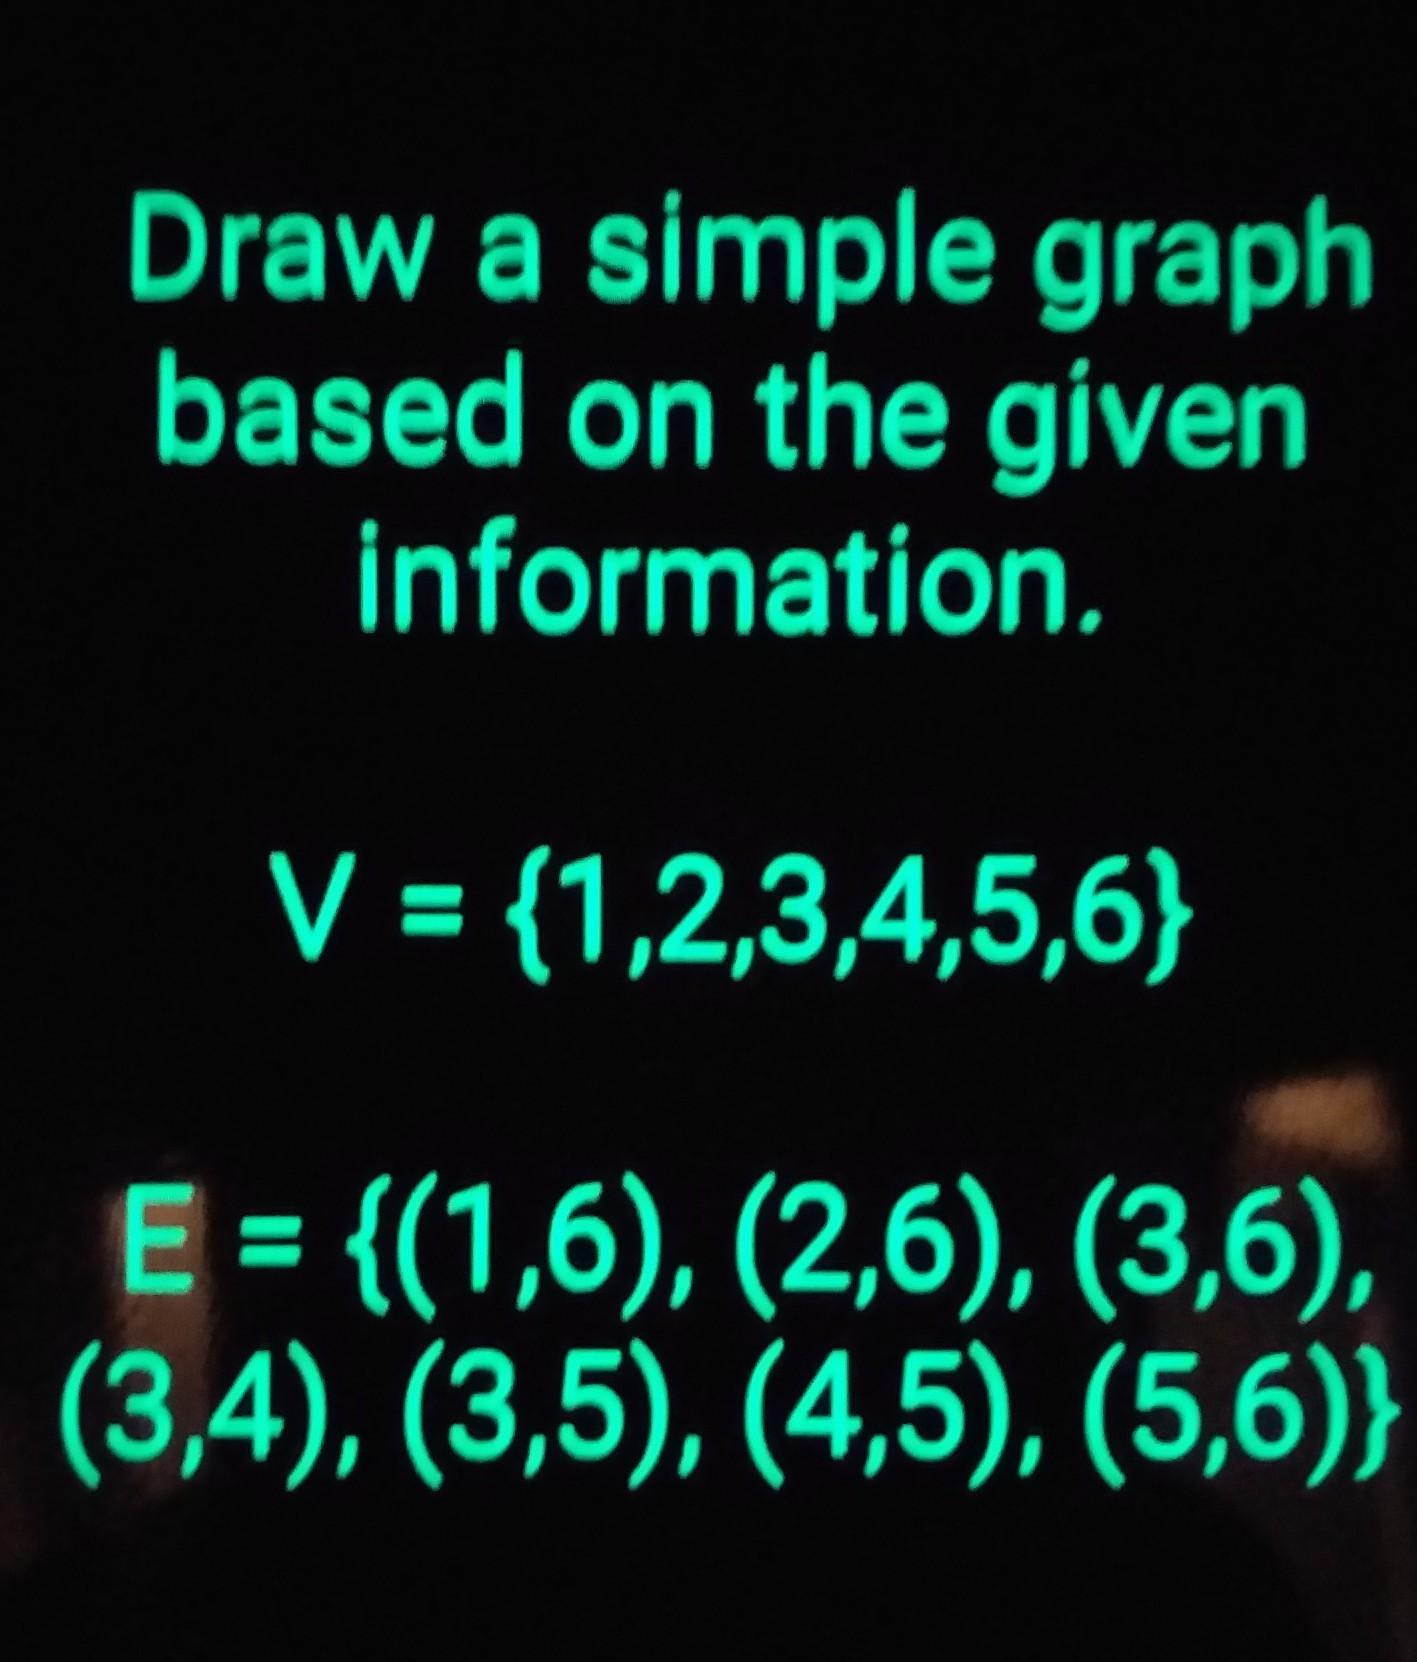 Draw A Simple Graph Based On The Given Information. V = {1,2,3,4,5,6) E = {(1,6), (2,6), (3,6), (3,4),